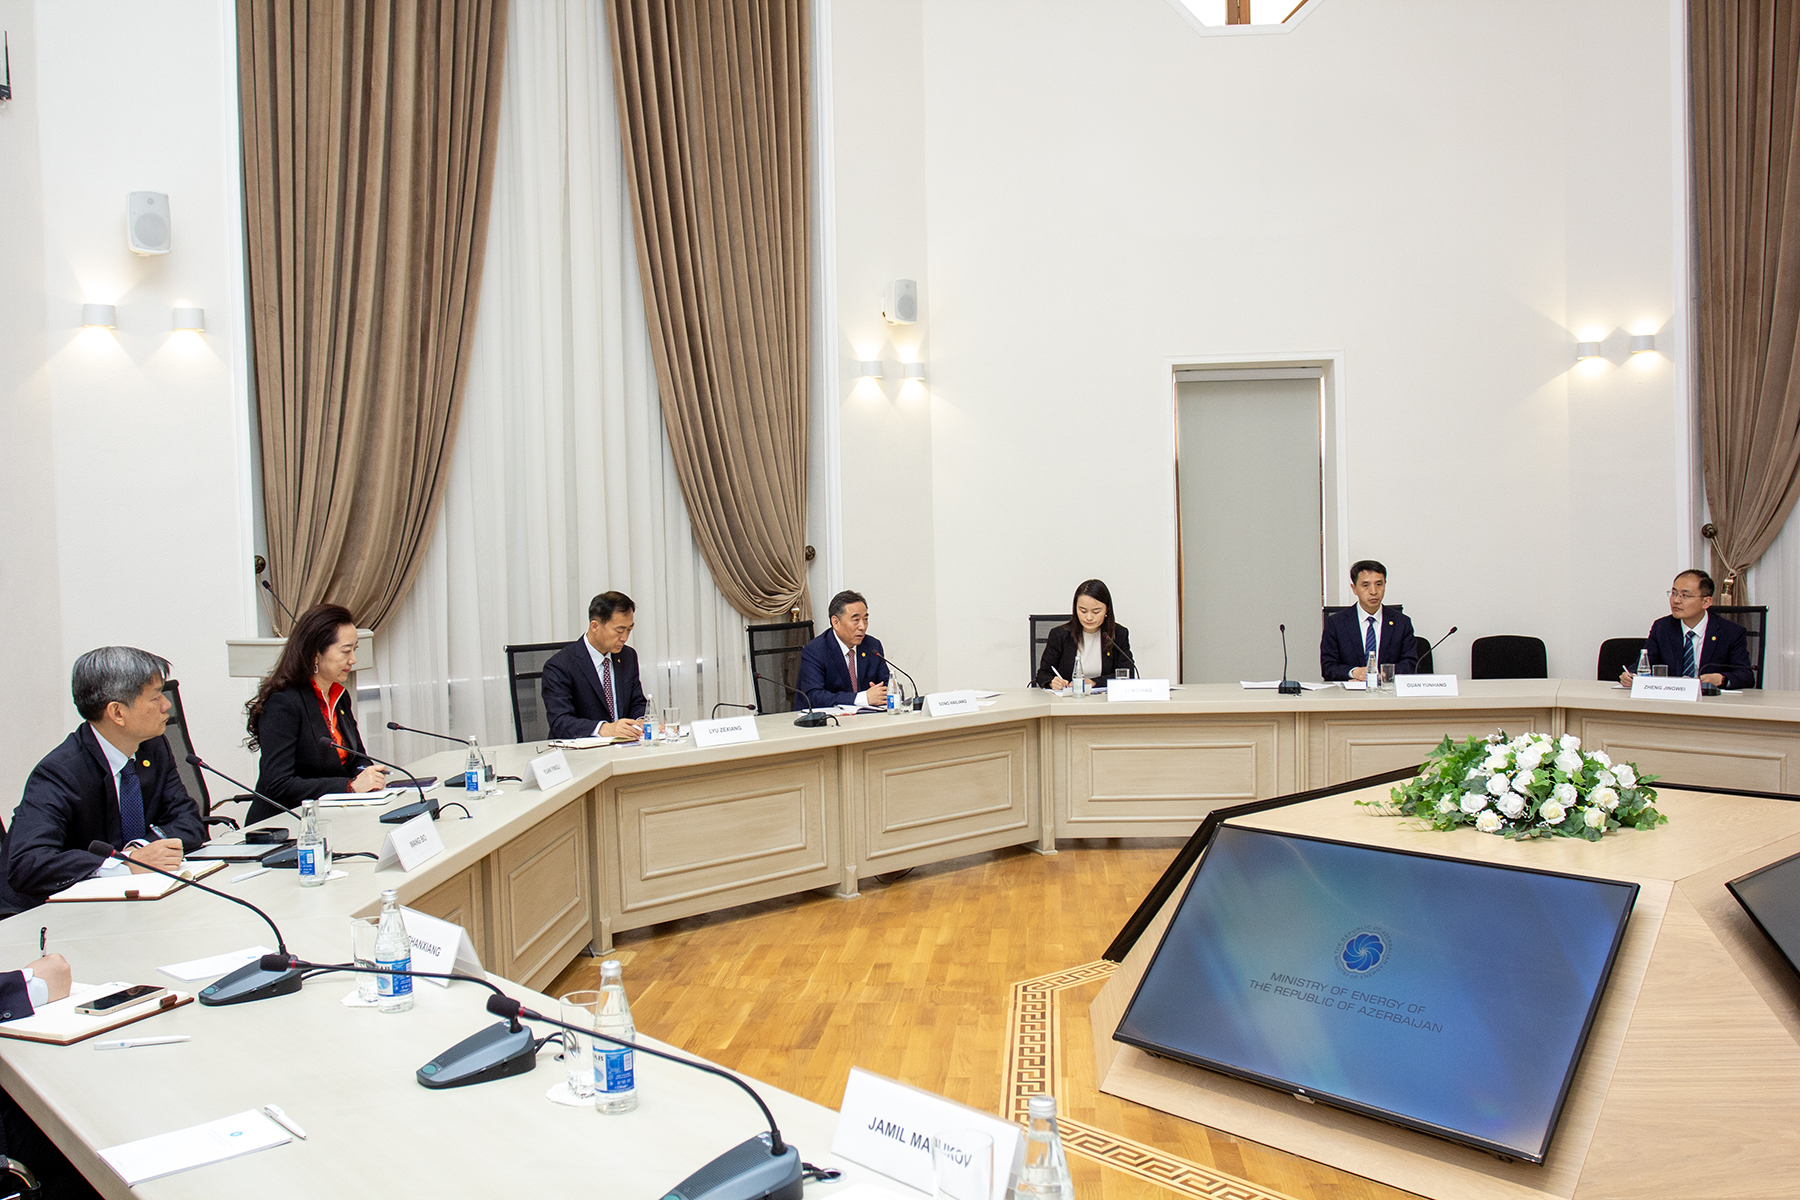 Development of Azerbaijan-China energy cooperation was discussed